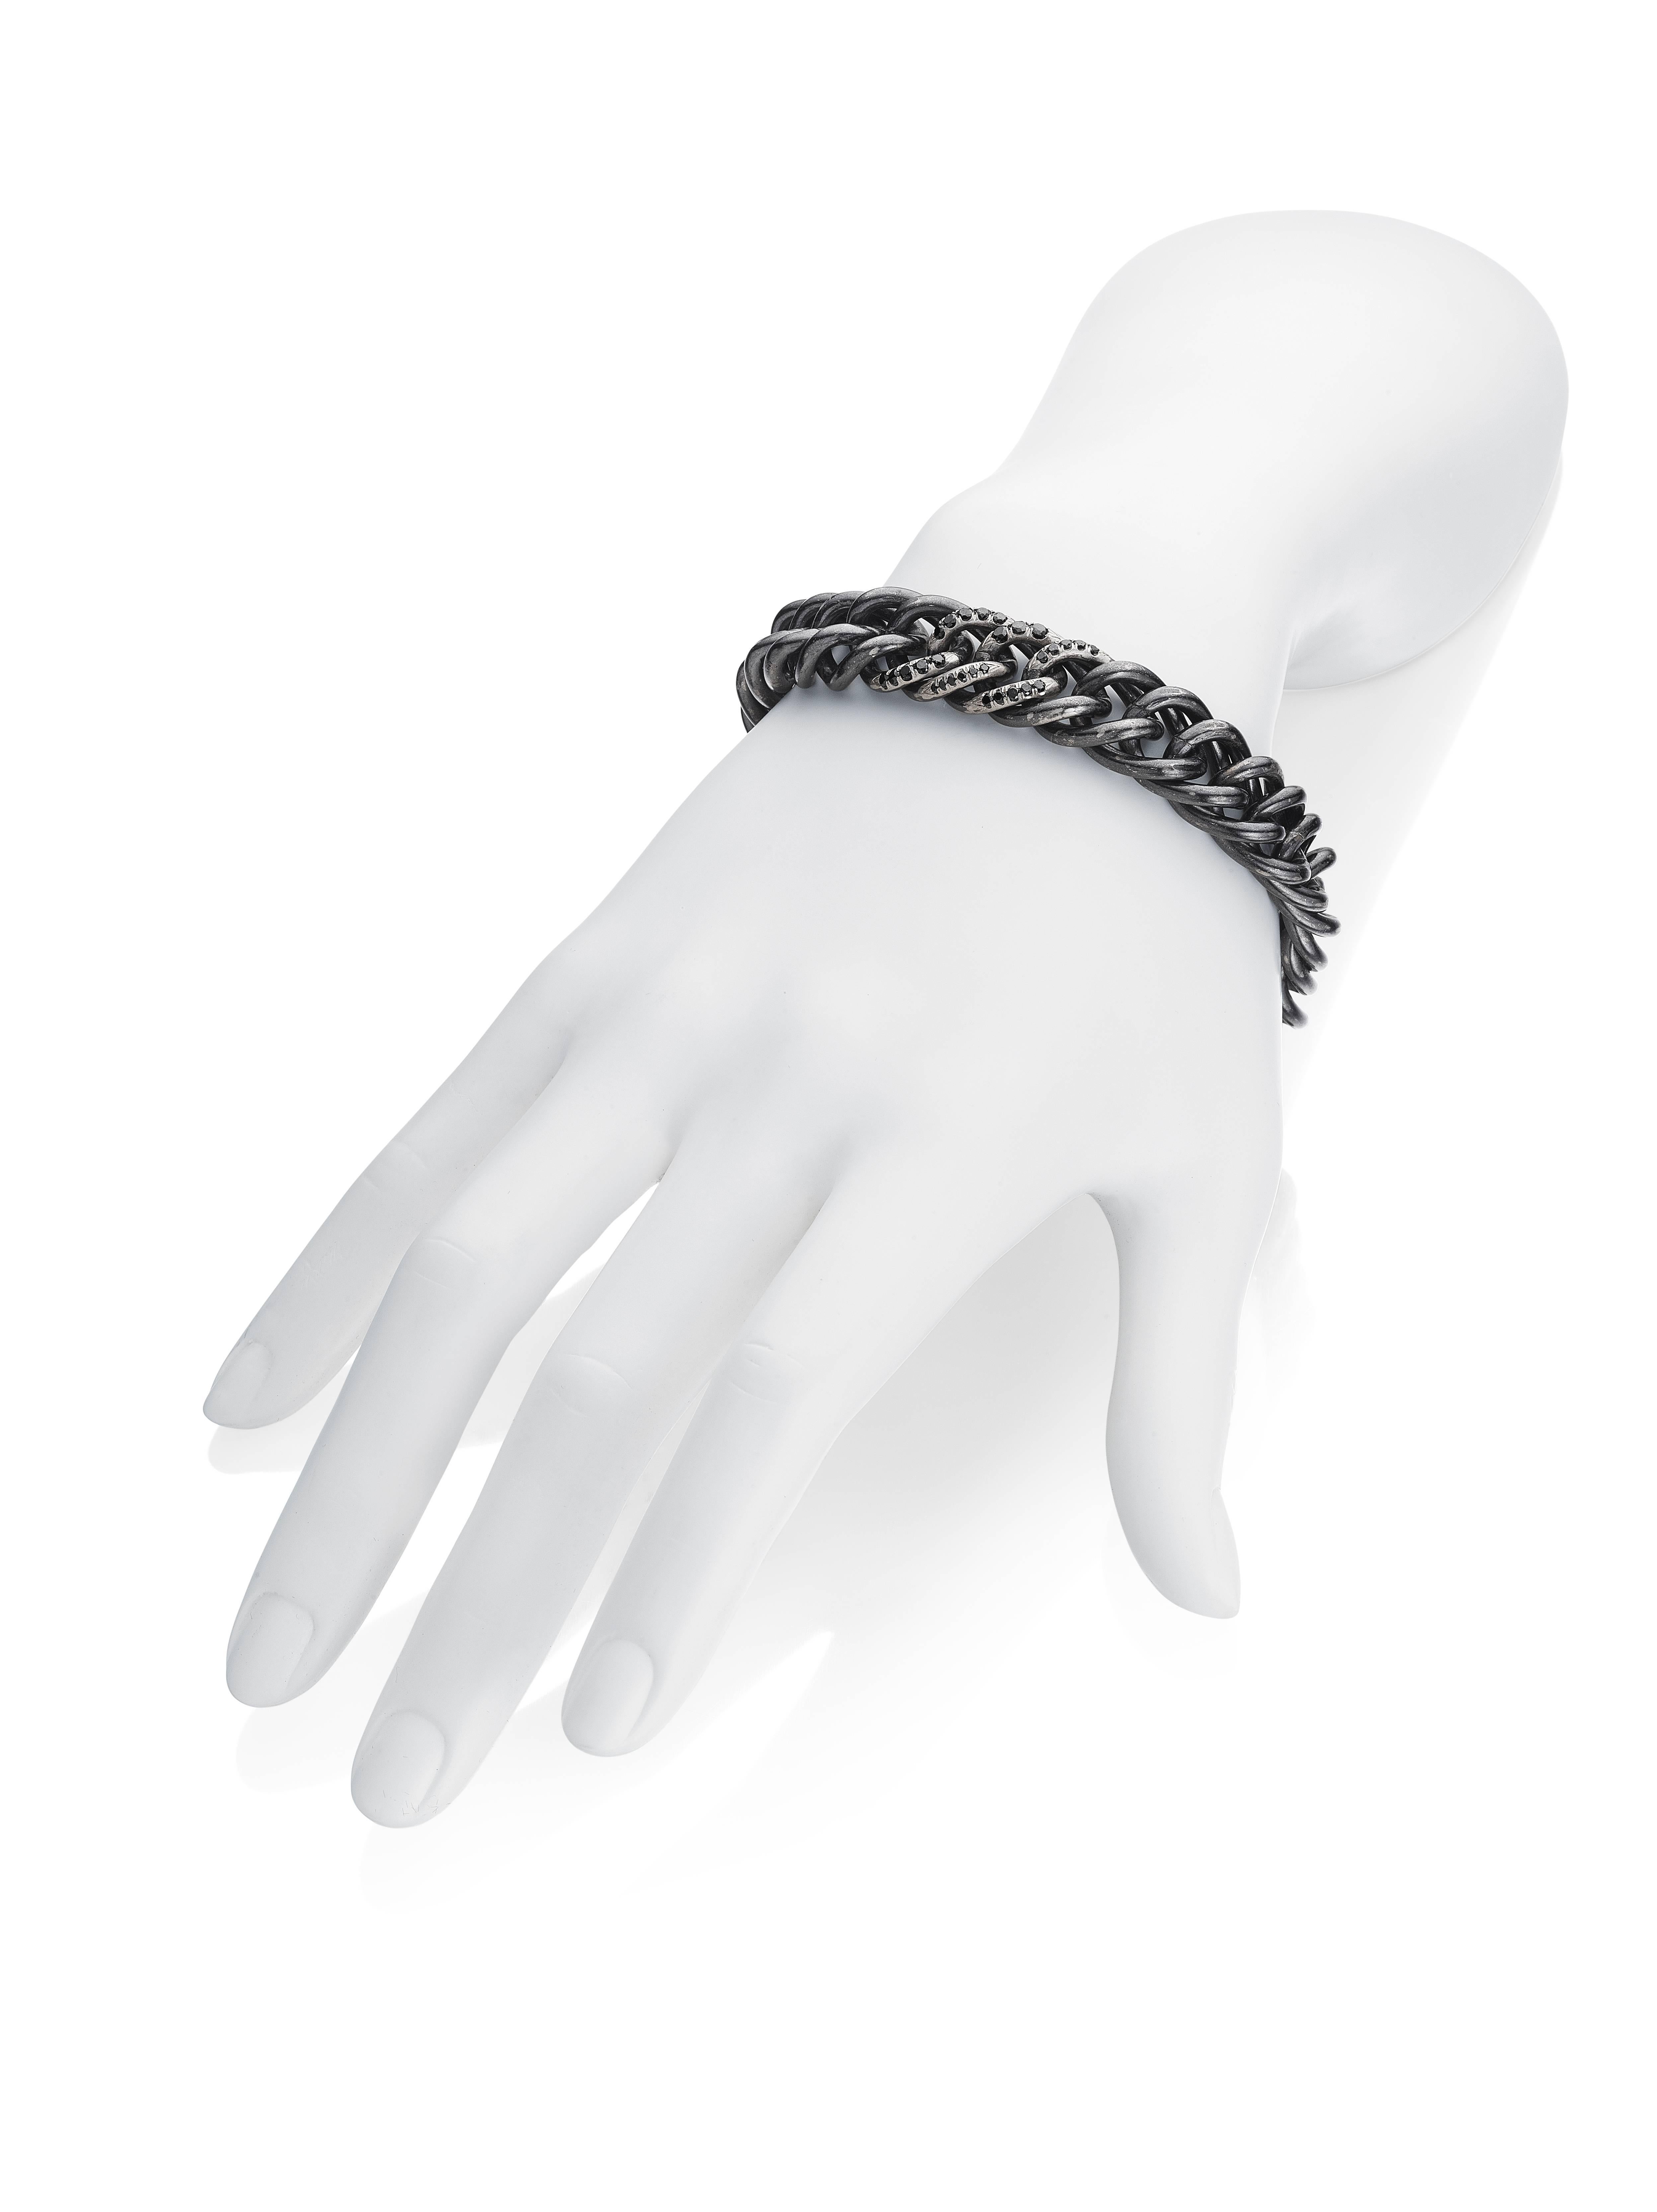 Handsome for anyone, this casual yet elegant bracelet is our nod of the head to trendy black diamonds and silver. This charming and stylish blackened sterling silver chain link bracelet is set with 0.715 carats of scintillating black diamonds adding